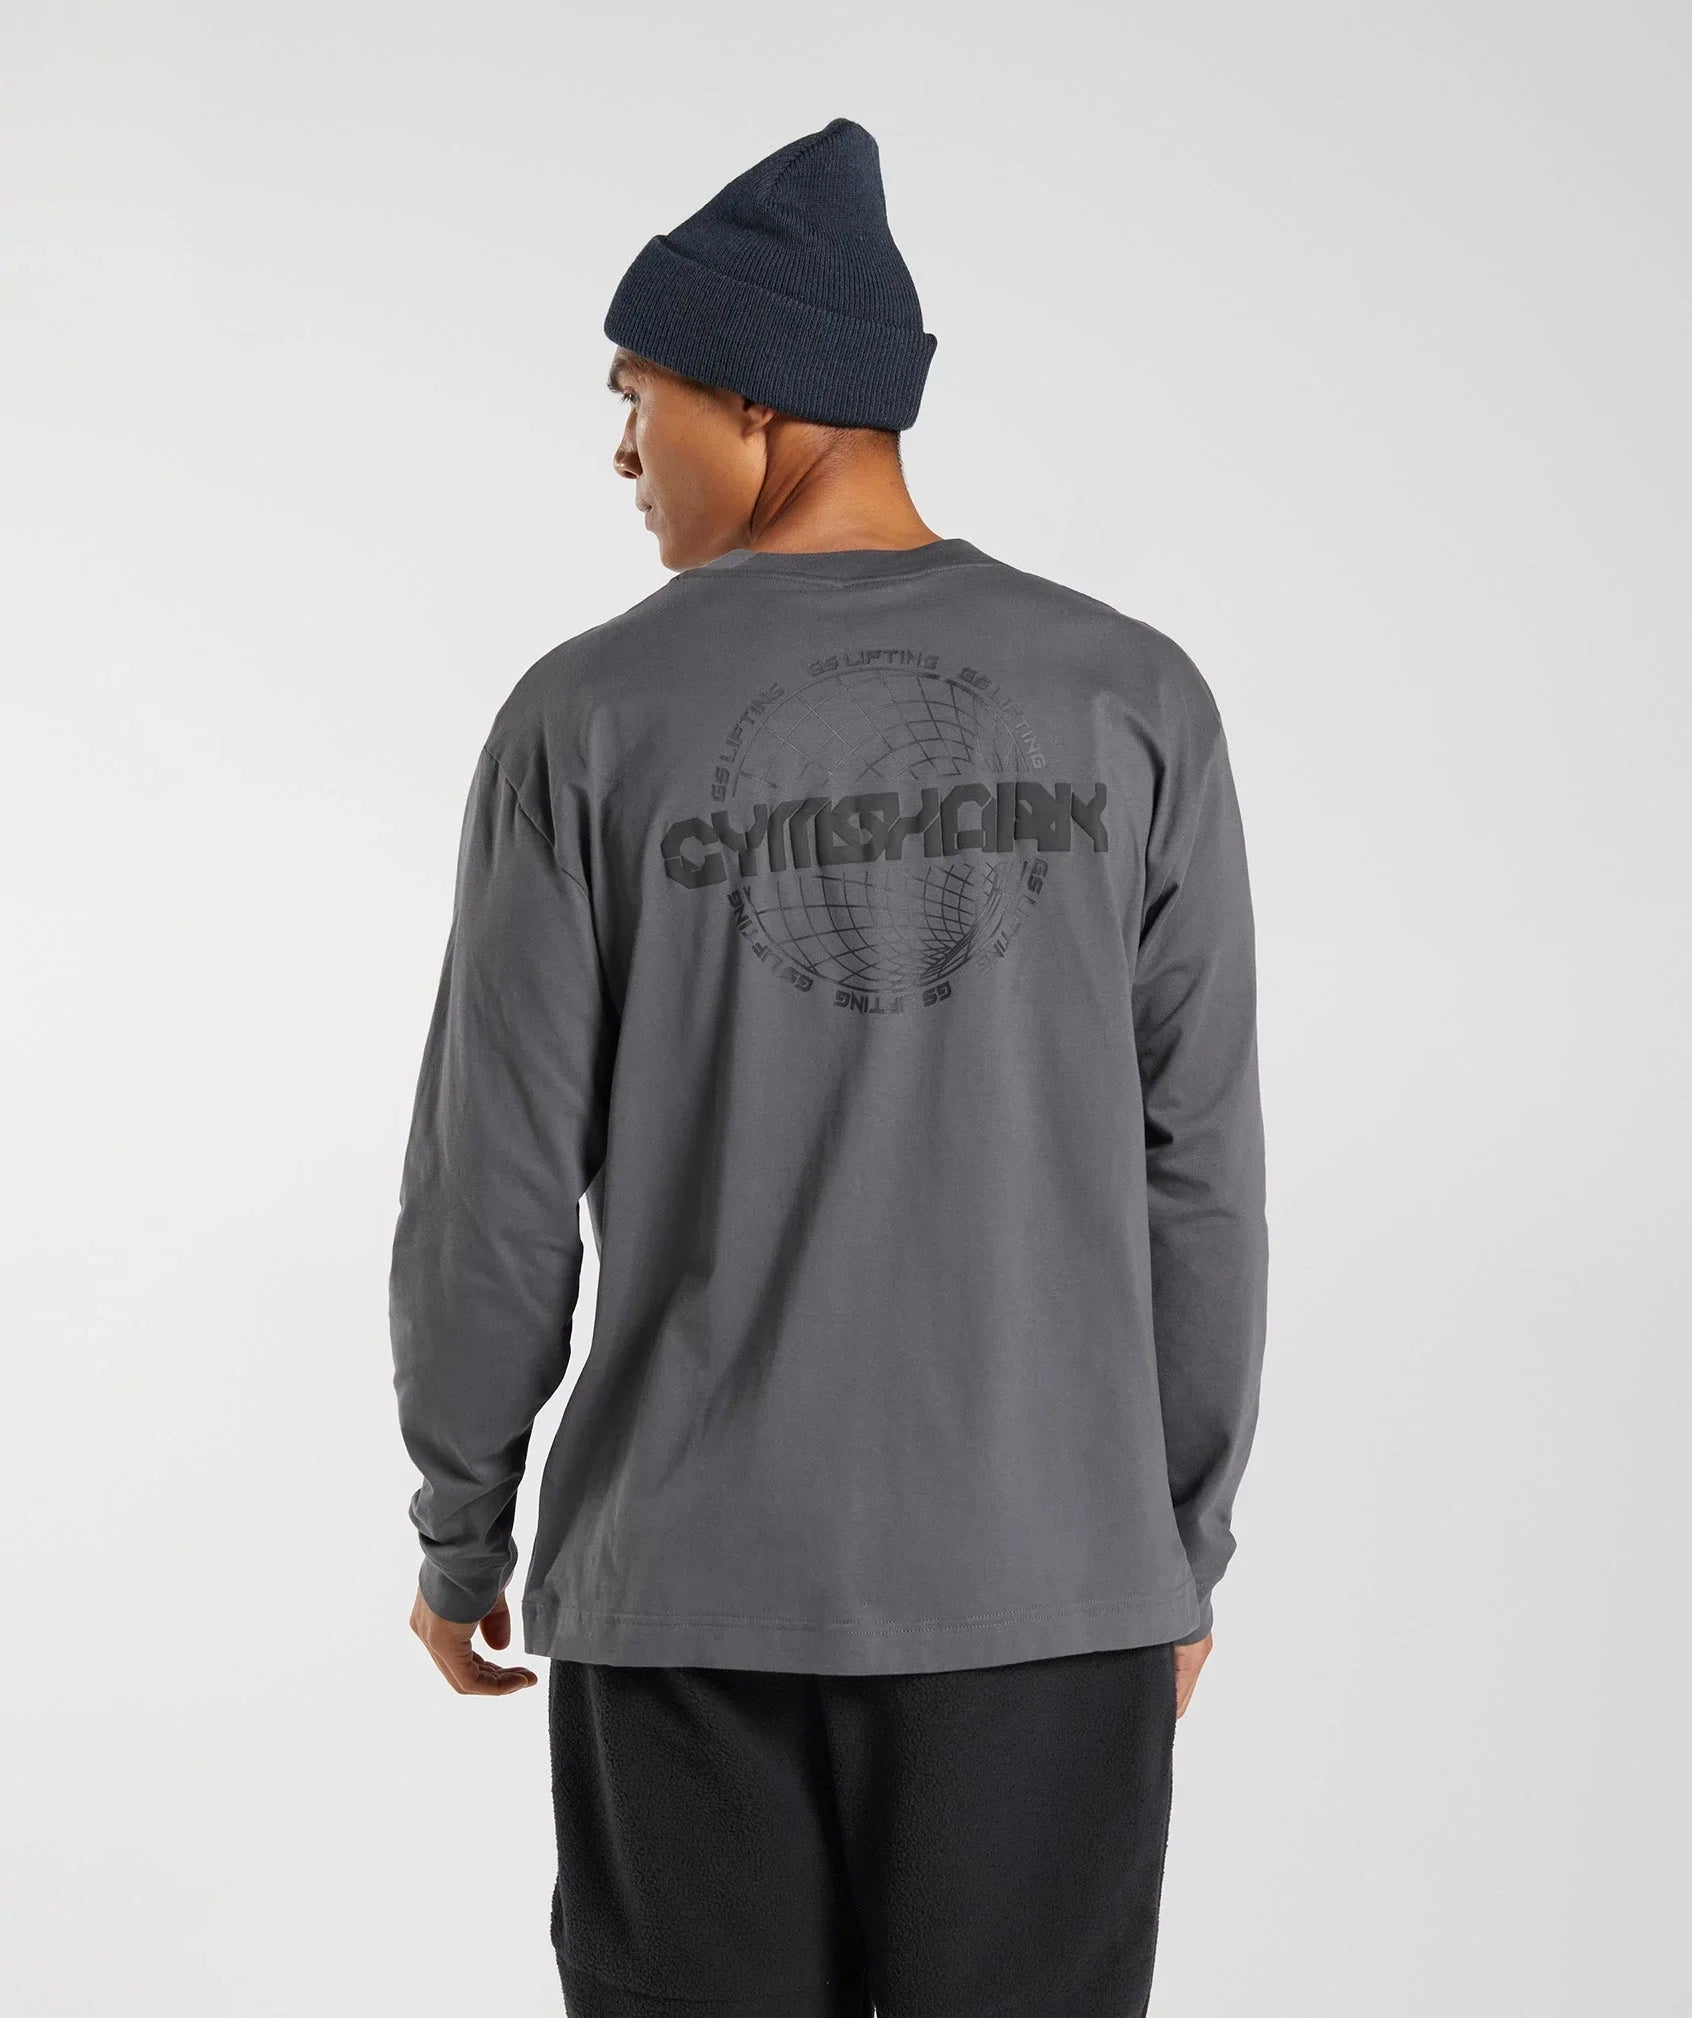 Vibes Long Sleeve T-Shirt in Silhouette Grey - view 1